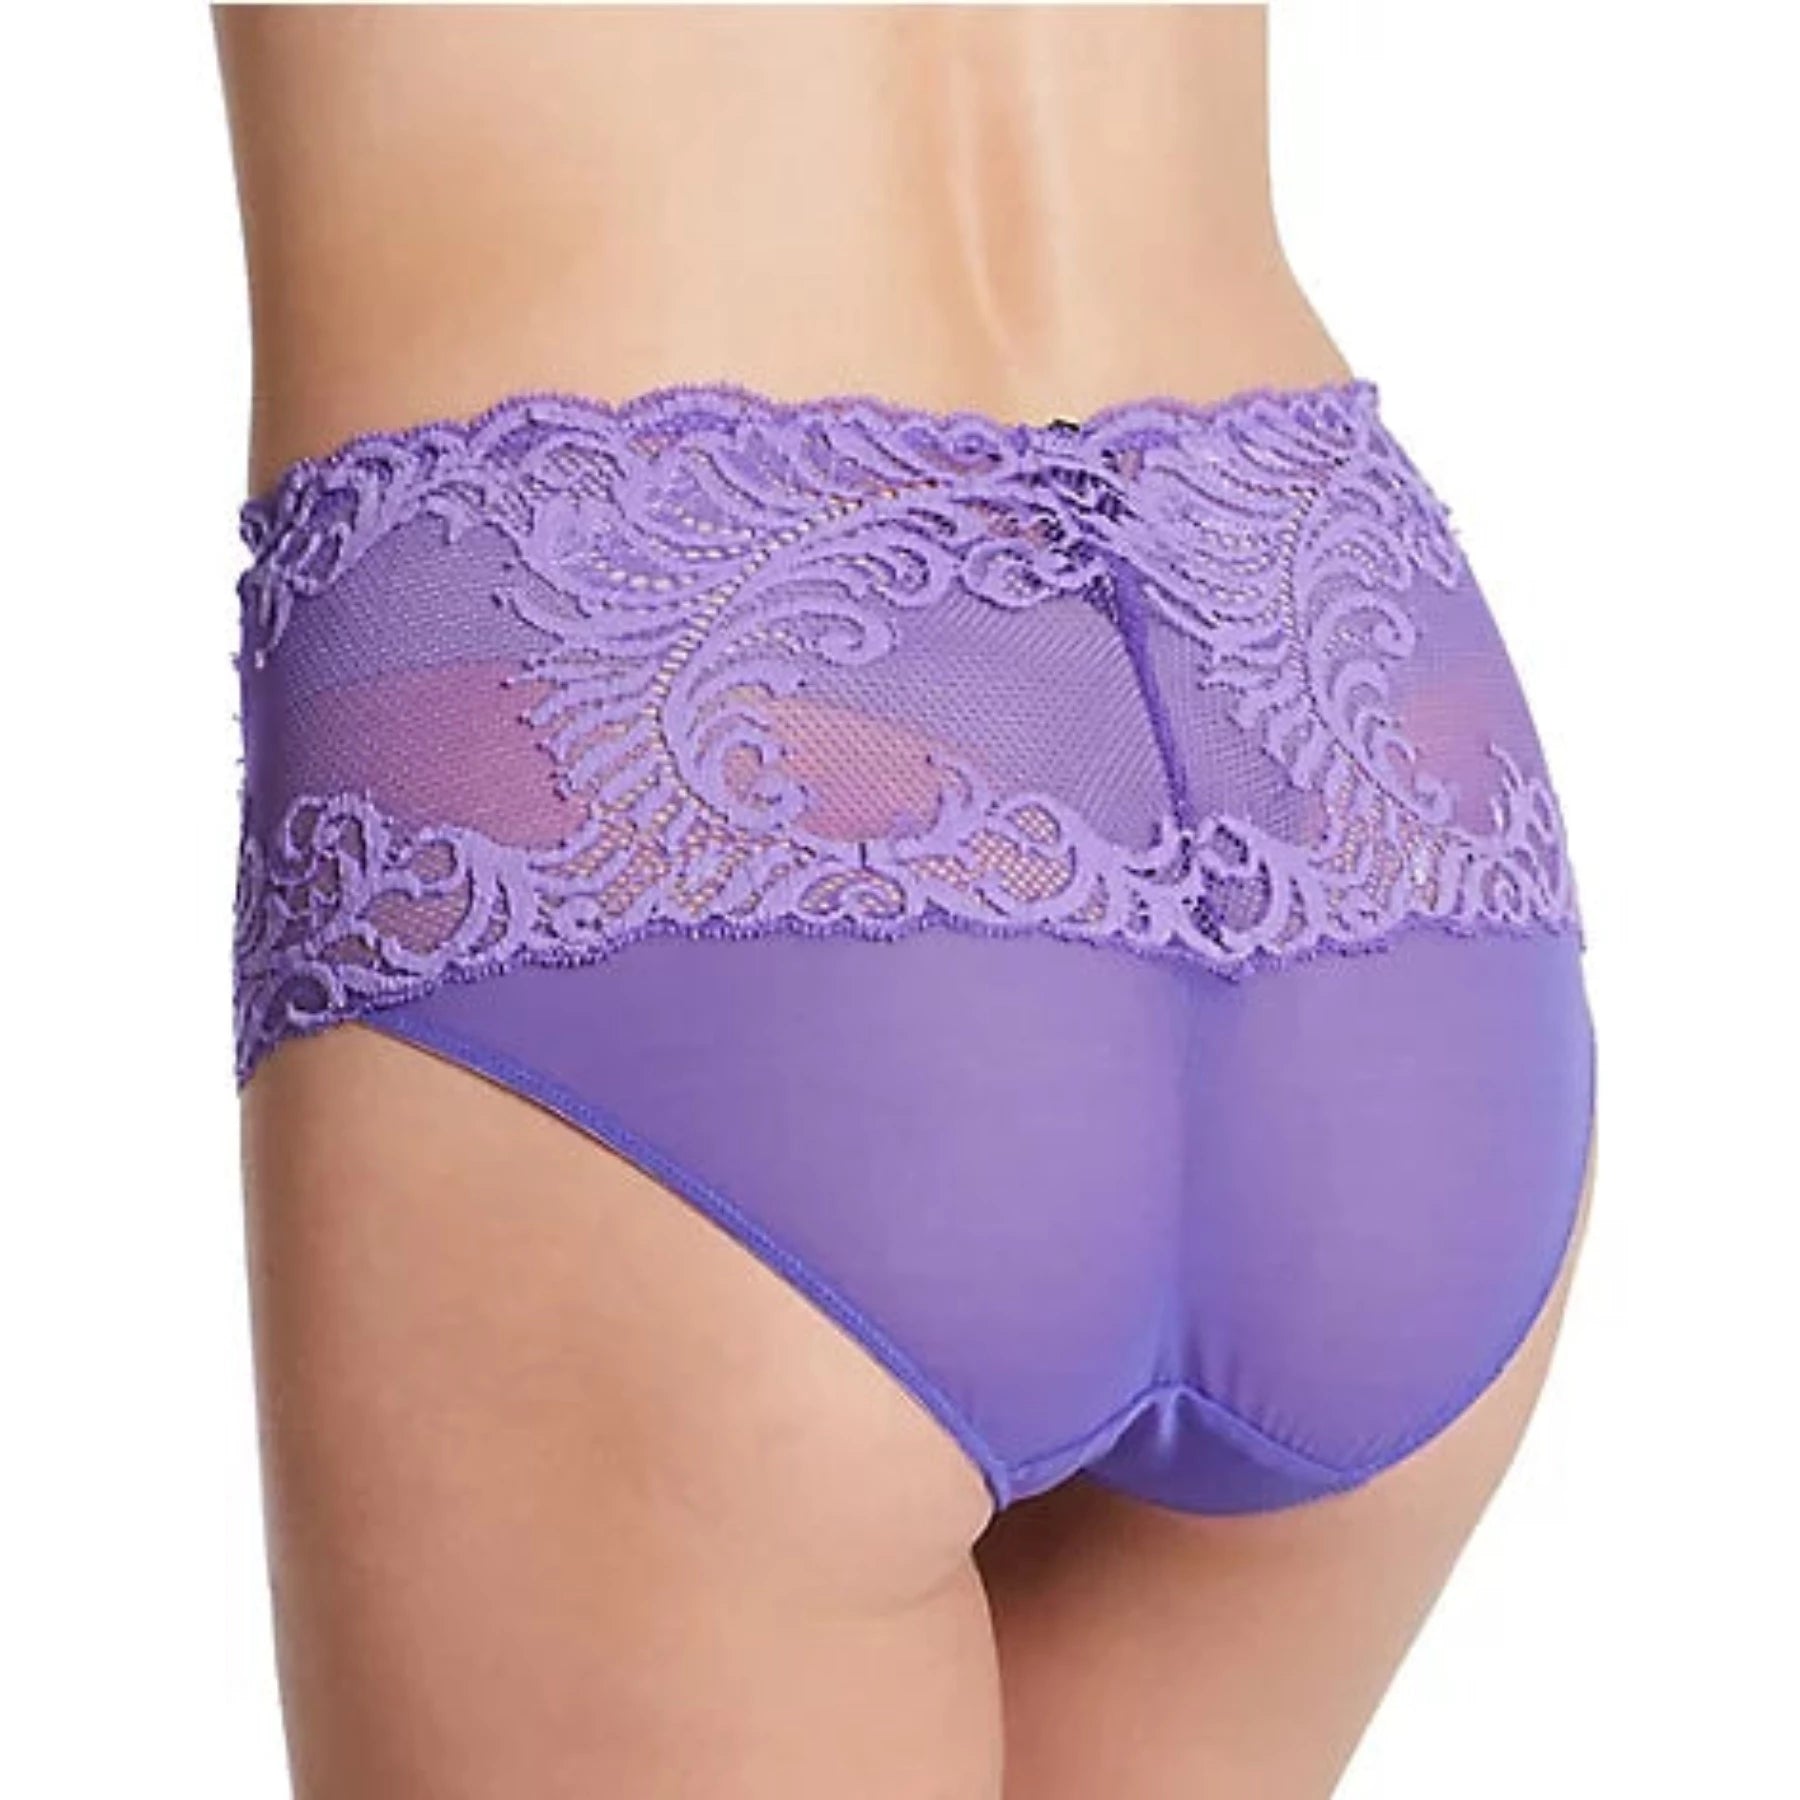 Feathers Girl Brief 756023 - Blue Lavender